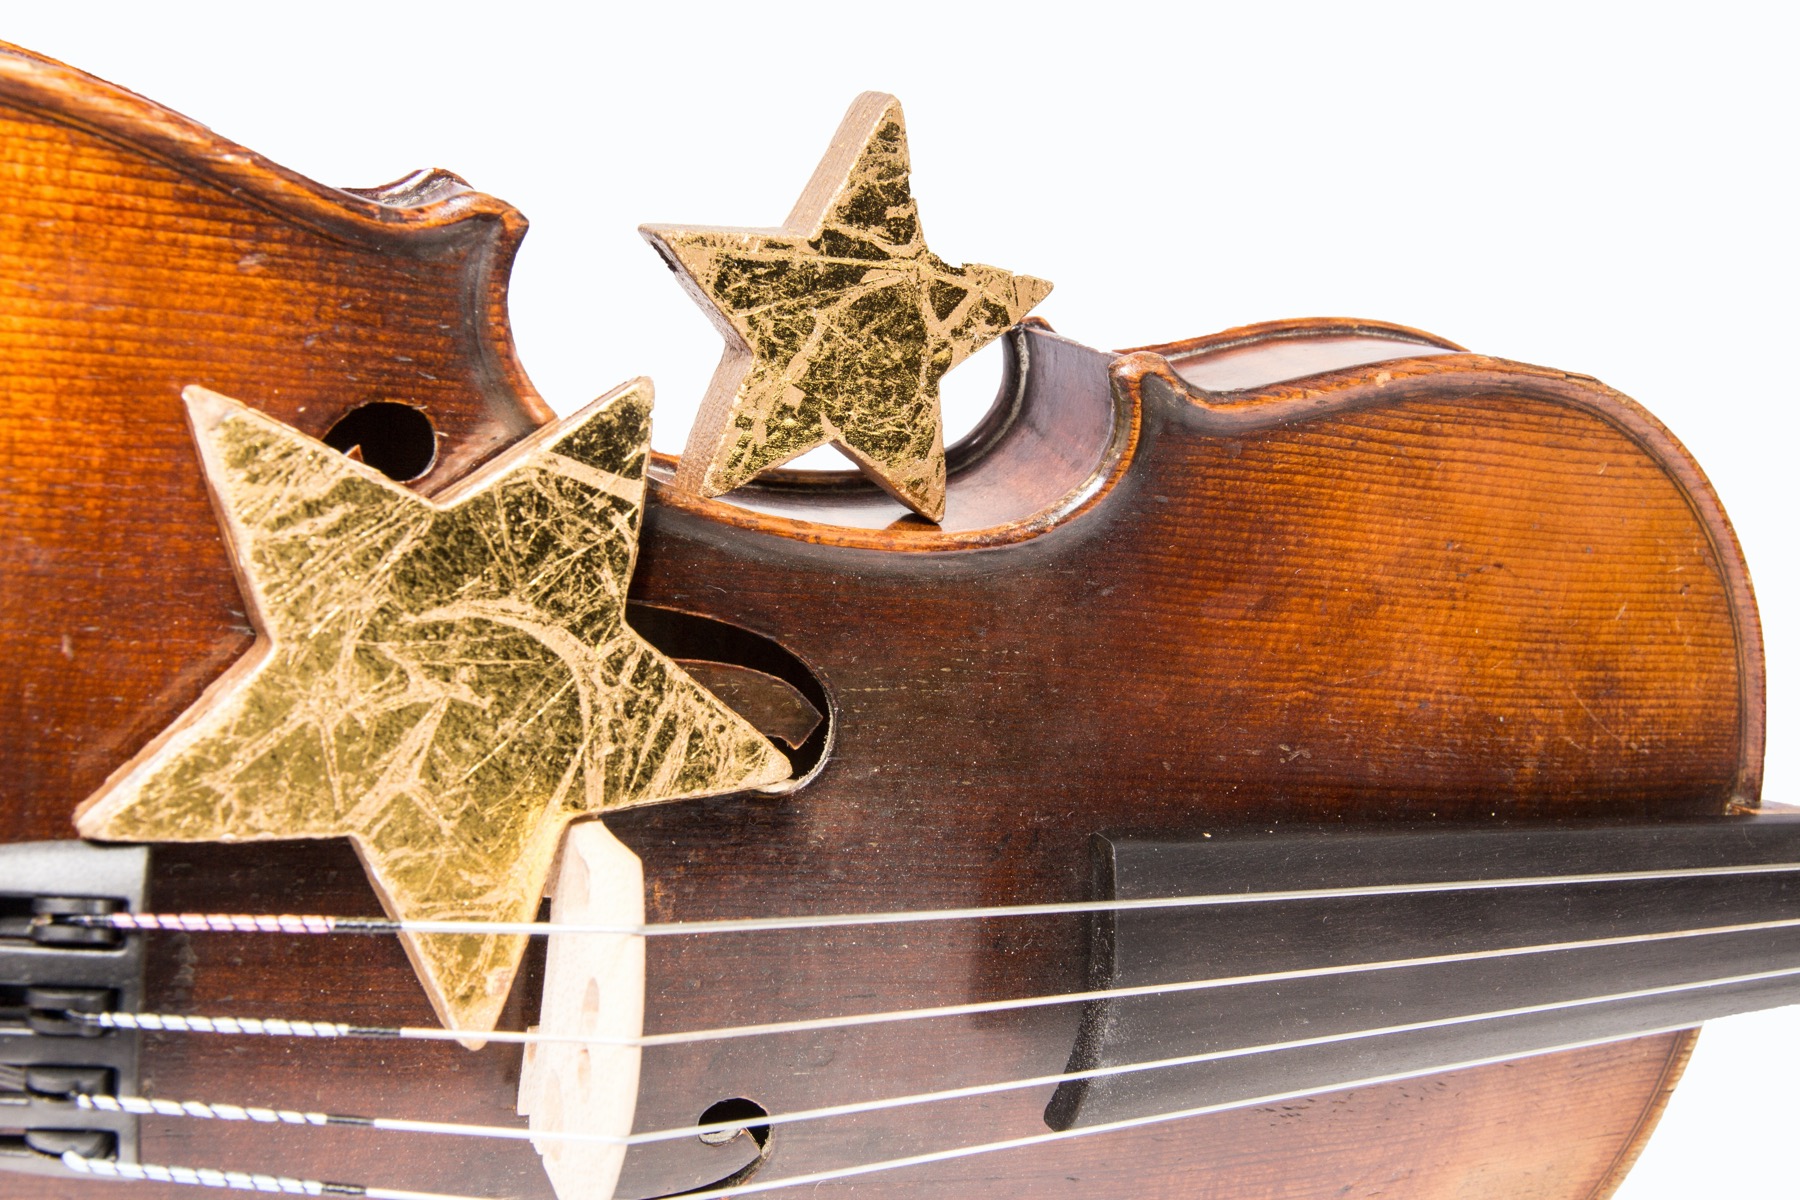 Violin with Christmas decorations on it